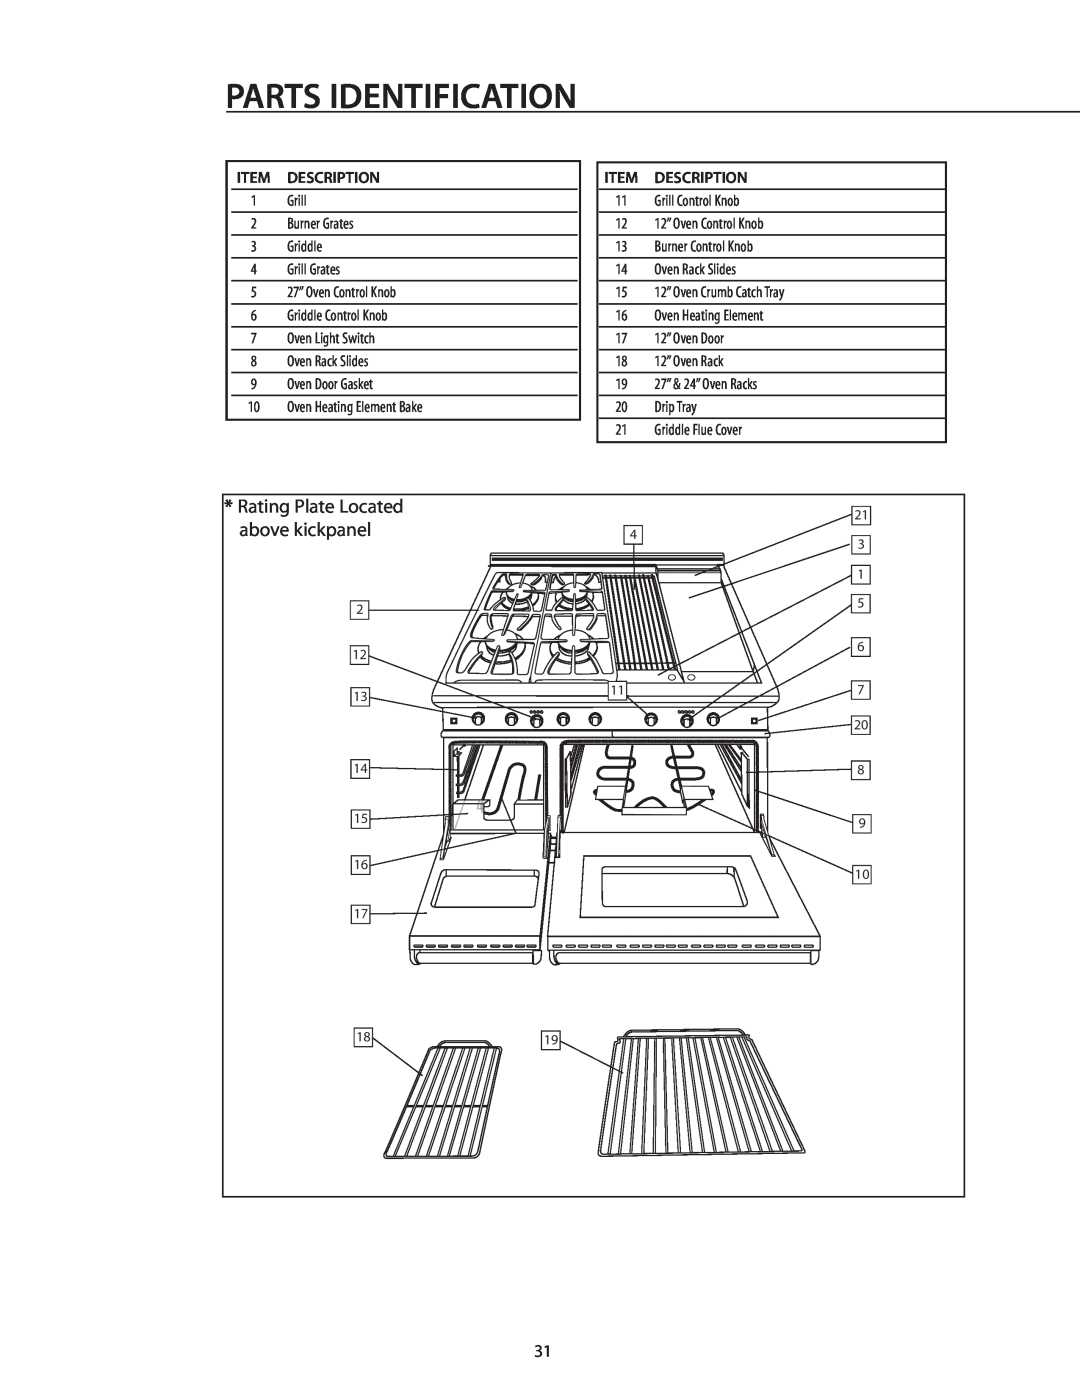 DCS RDS-305 manual Parts Identification, Rating Plate Located, above kickpanel 